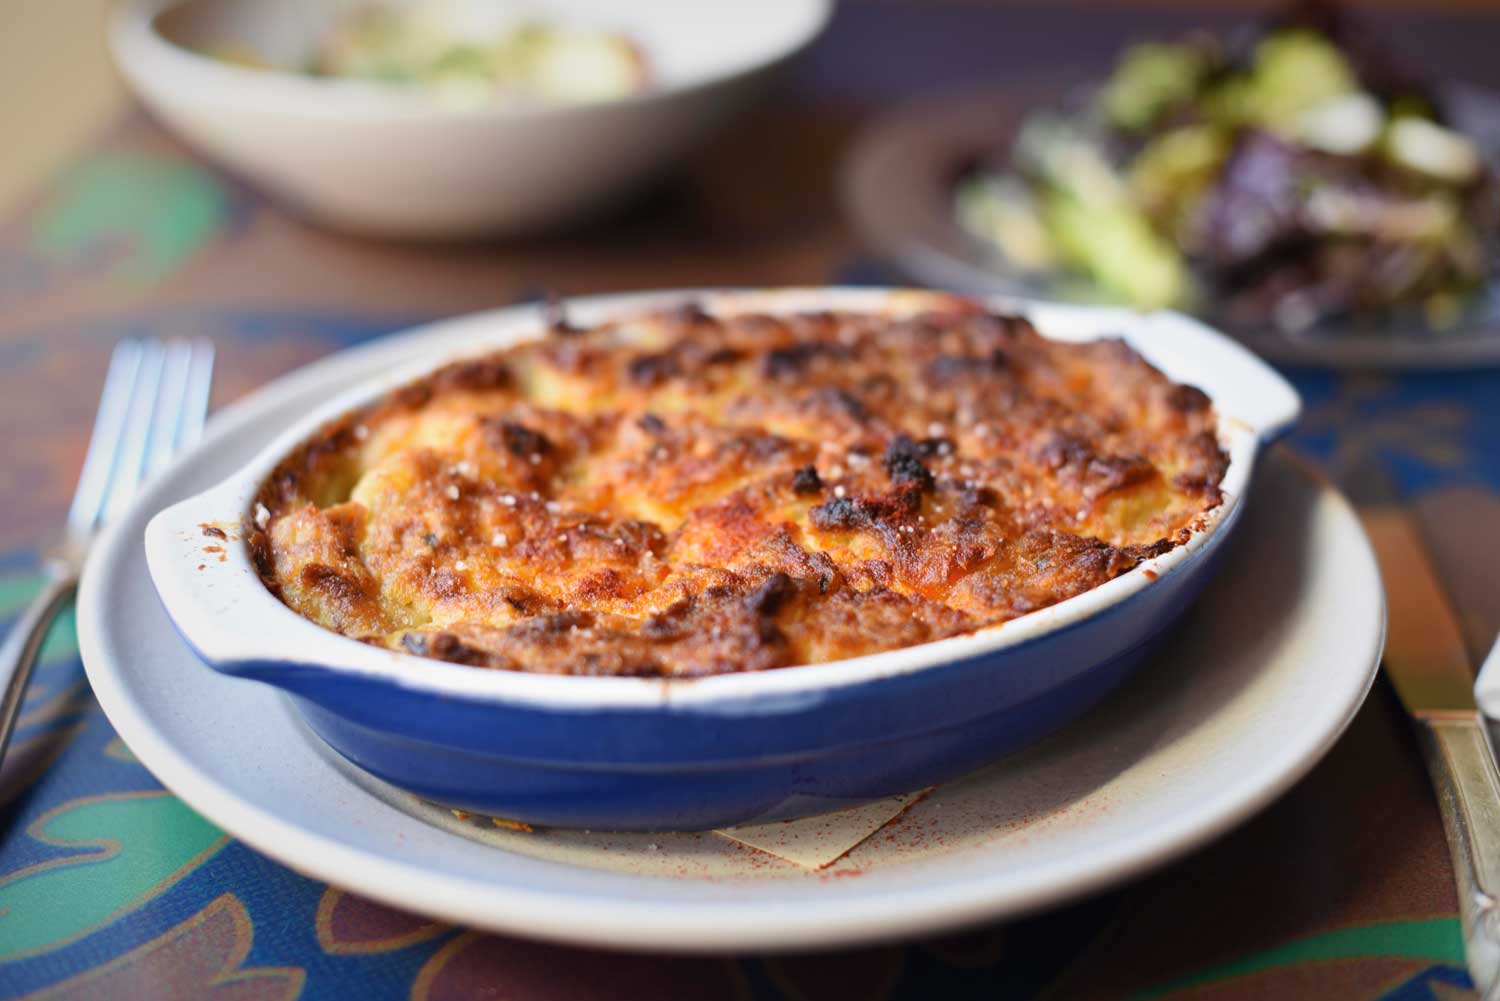 Chef Sara Hauman of Huxley is now serving Shepherd's Pie, a casserole style baked dish.